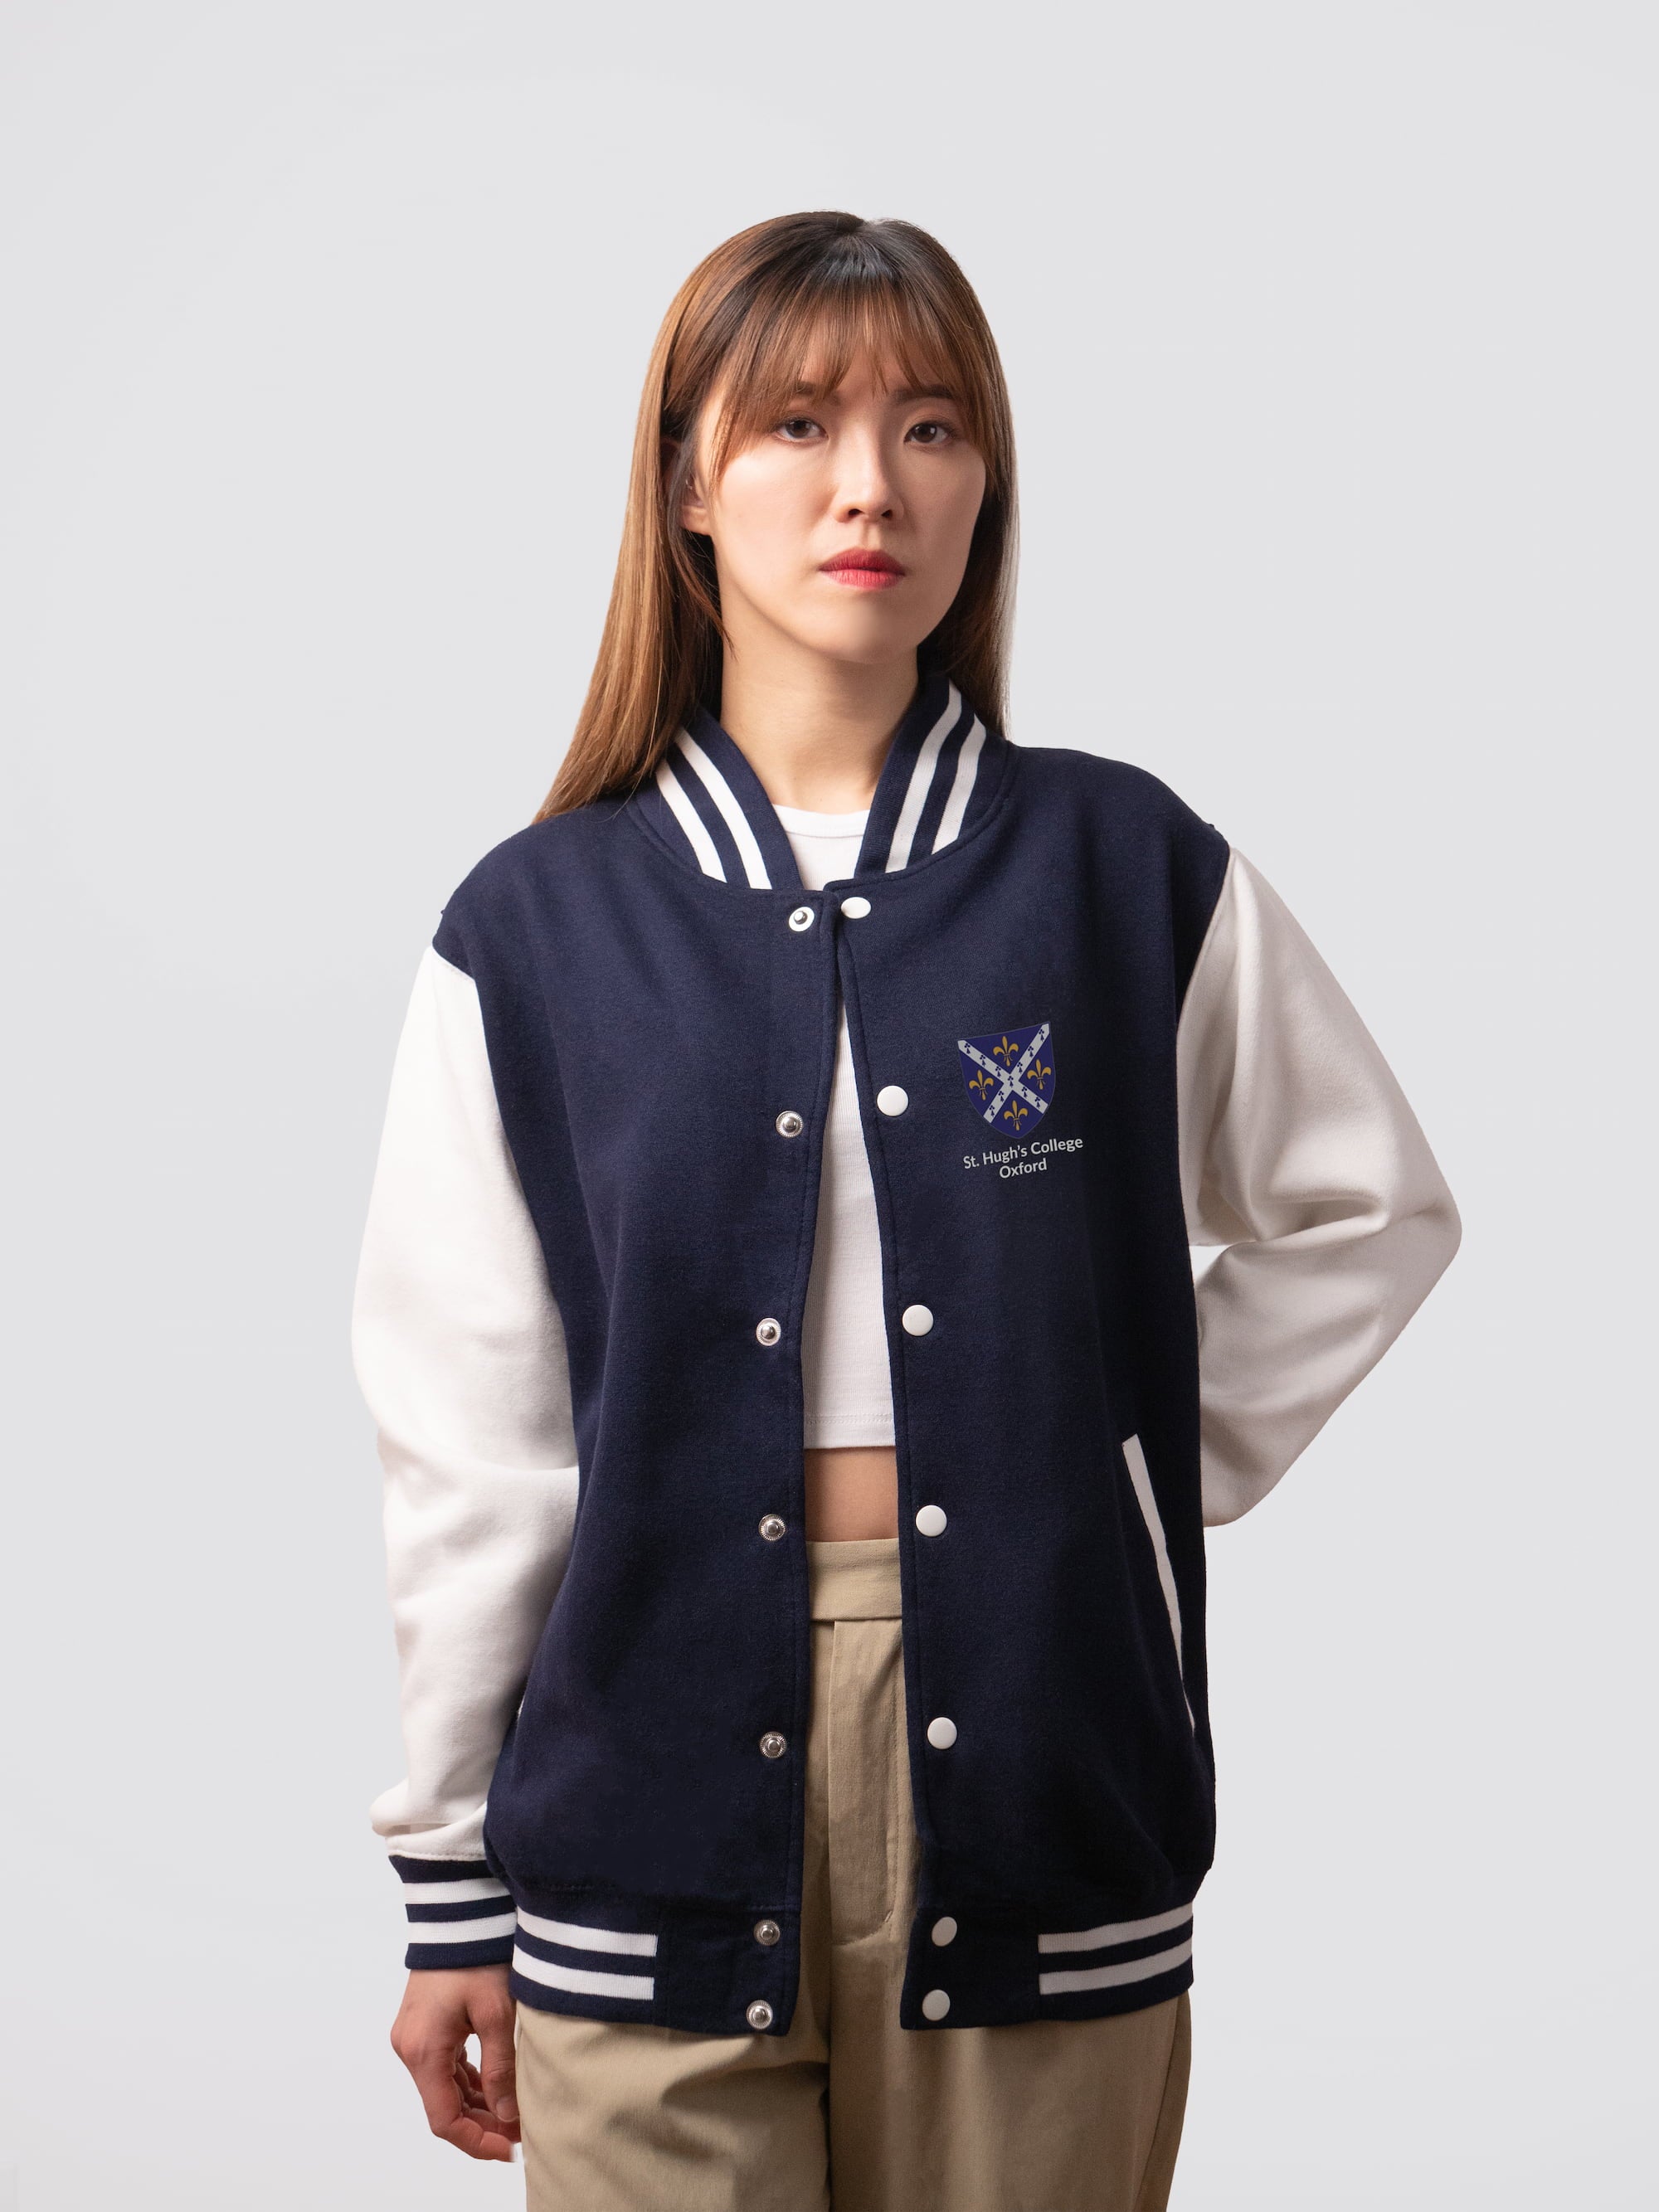 Retro style varsity jacket, with embroidered St Hugh's crest